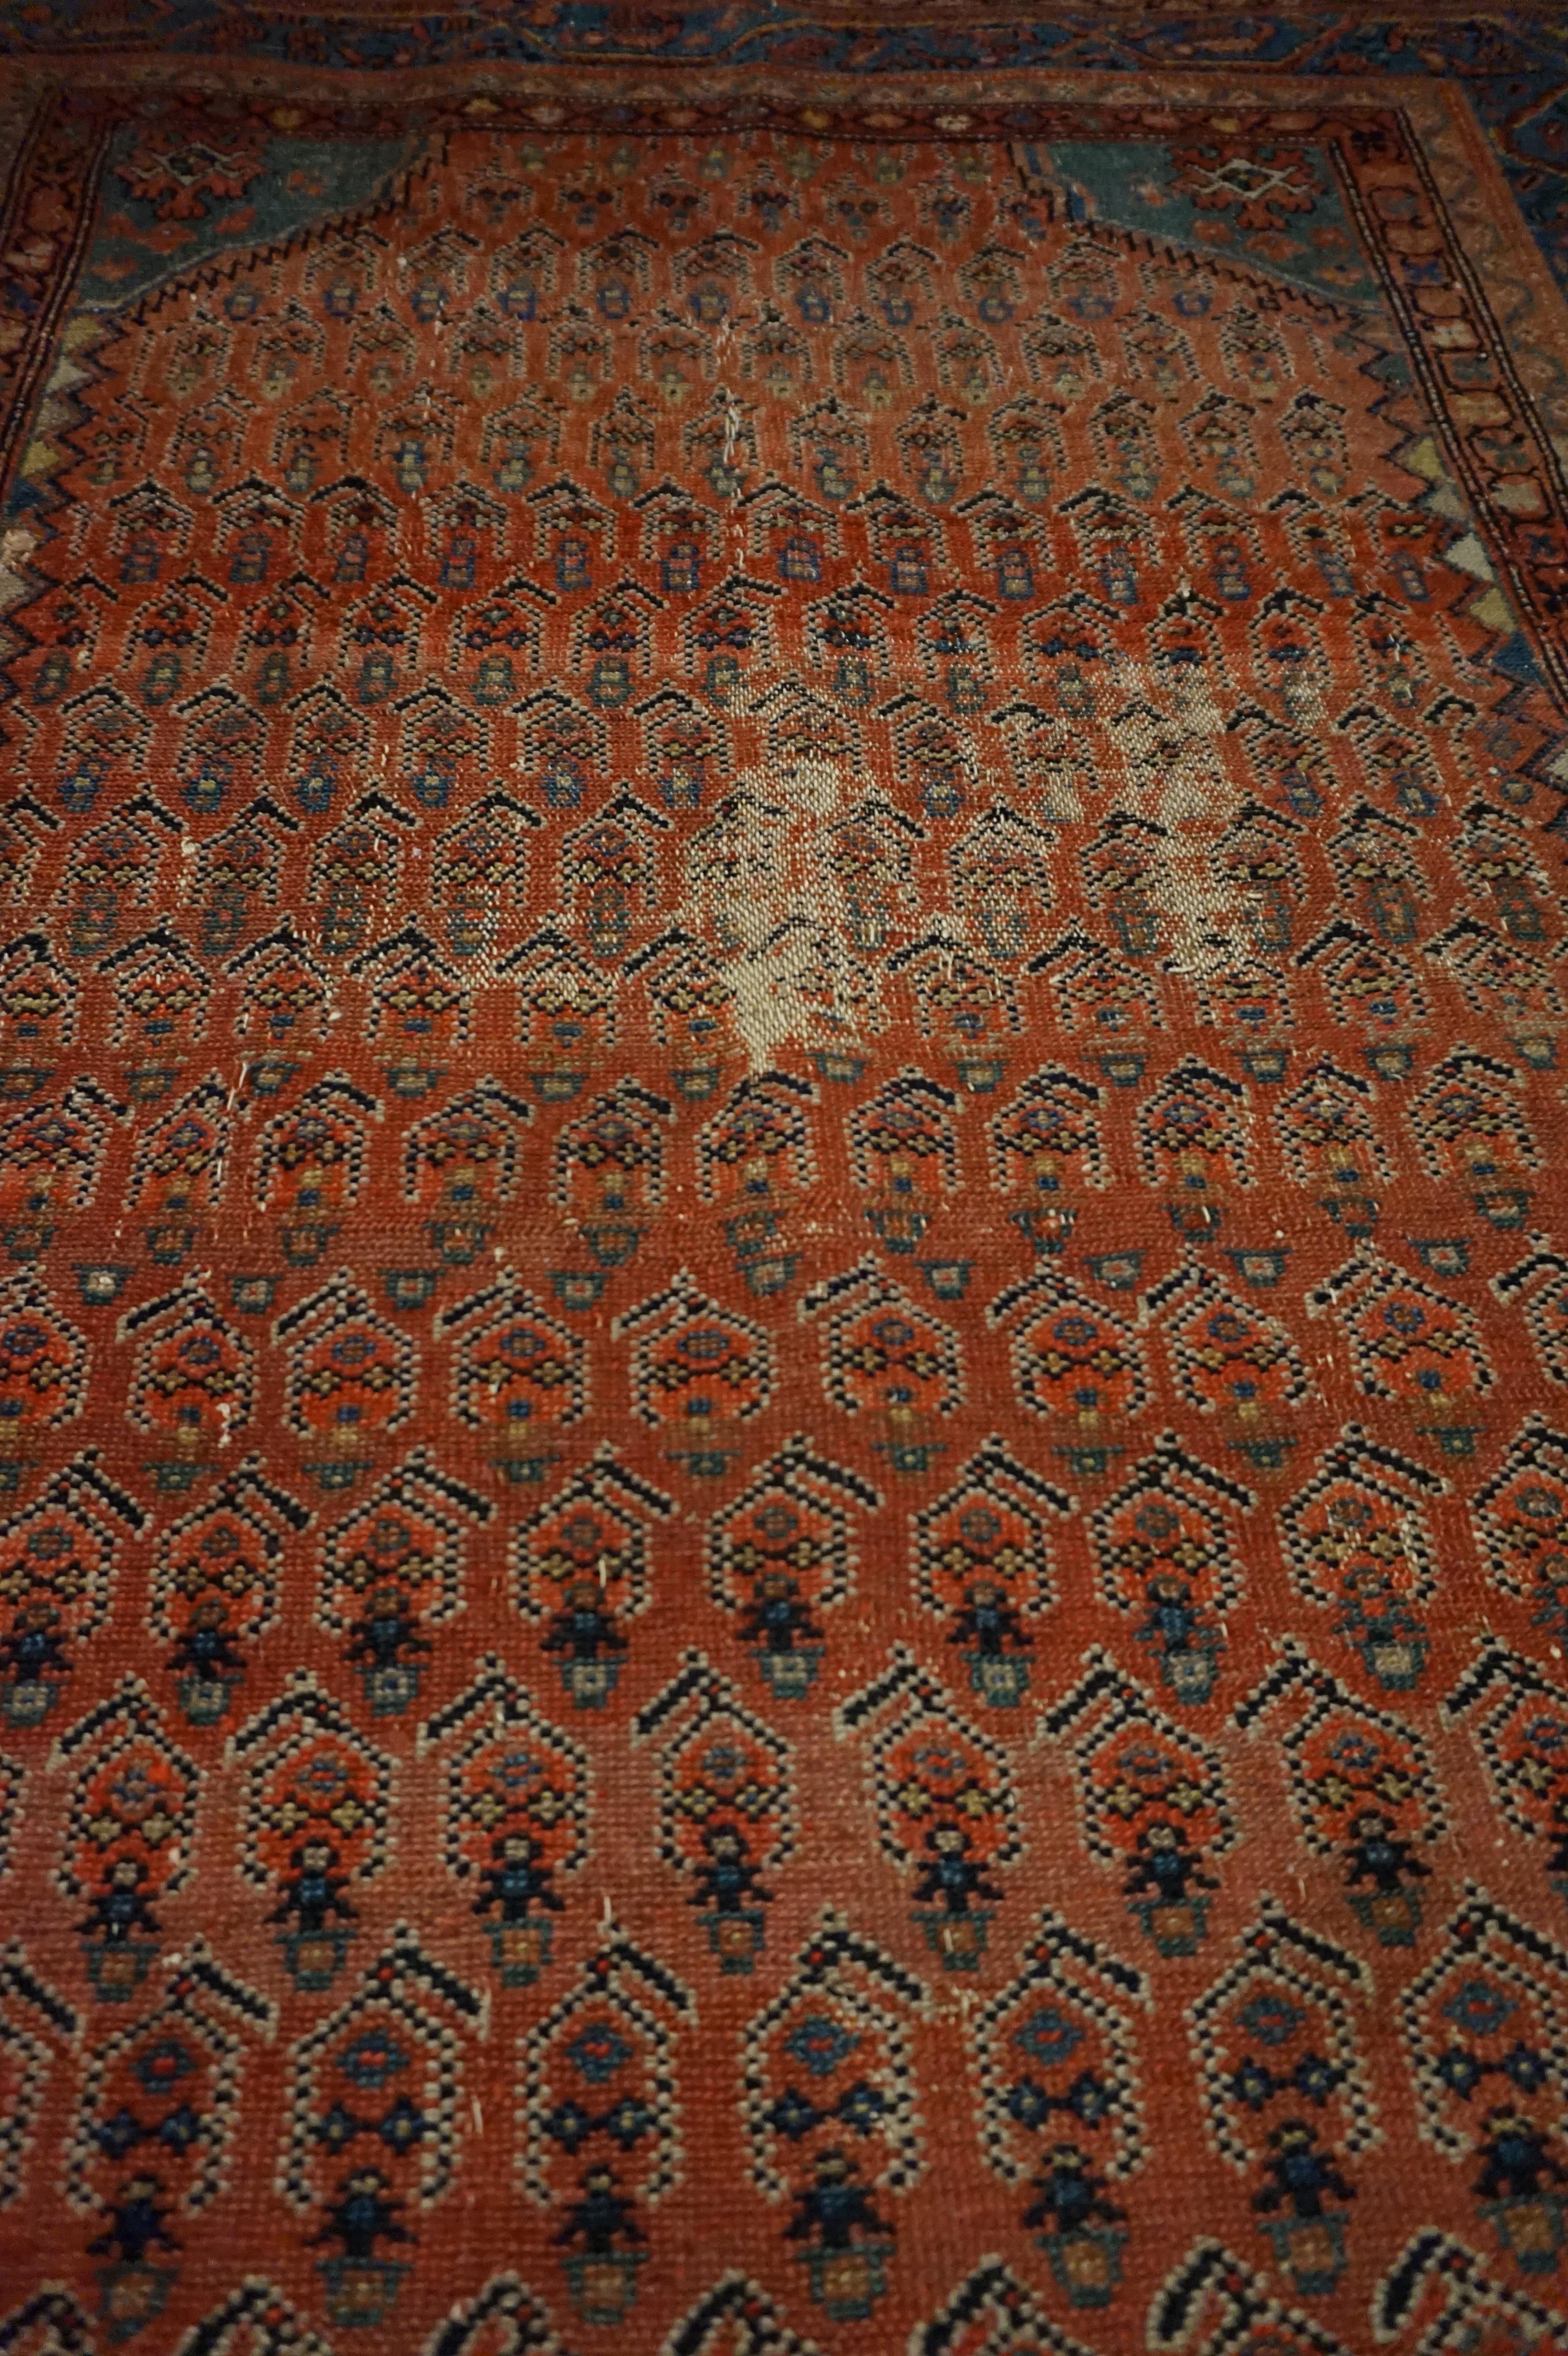 19th Century Tribal Boteh Paisley Hand-knotted Rug In Rust Hues For Sale 3